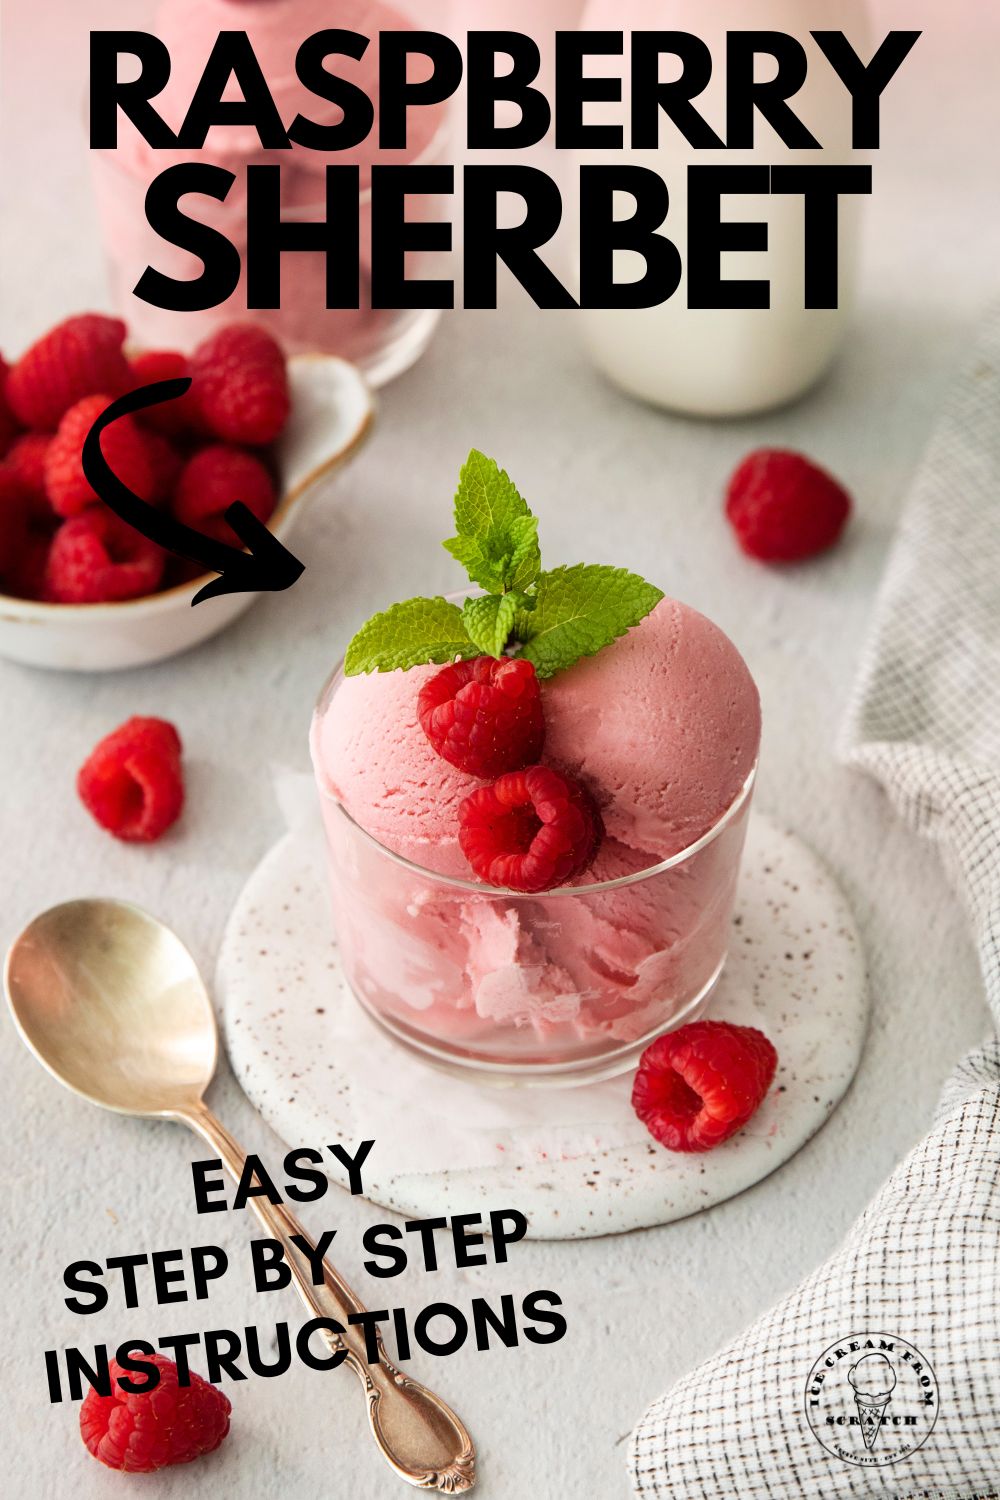 a short clear bowl filled with raspberry sherbet, garnished with mint and fresh berries. Text overlay at top says "raspberry sherbet". More text at bottom of image says "easy step by step instructions".